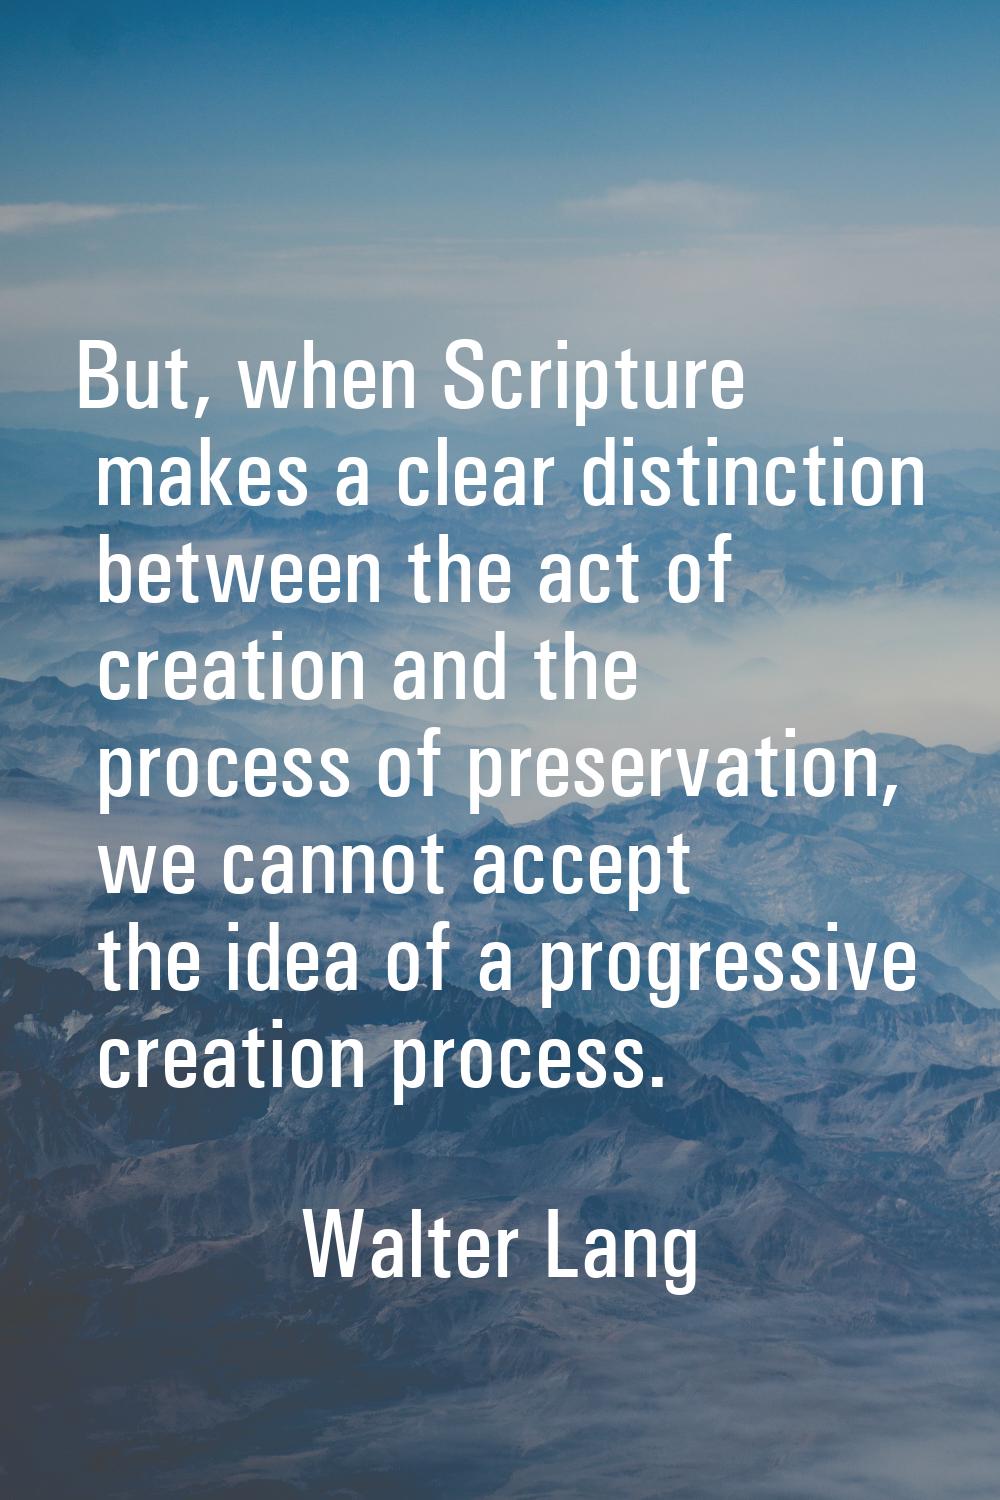 But, when Scripture makes a clear distinction between the act of creation and the process of preser